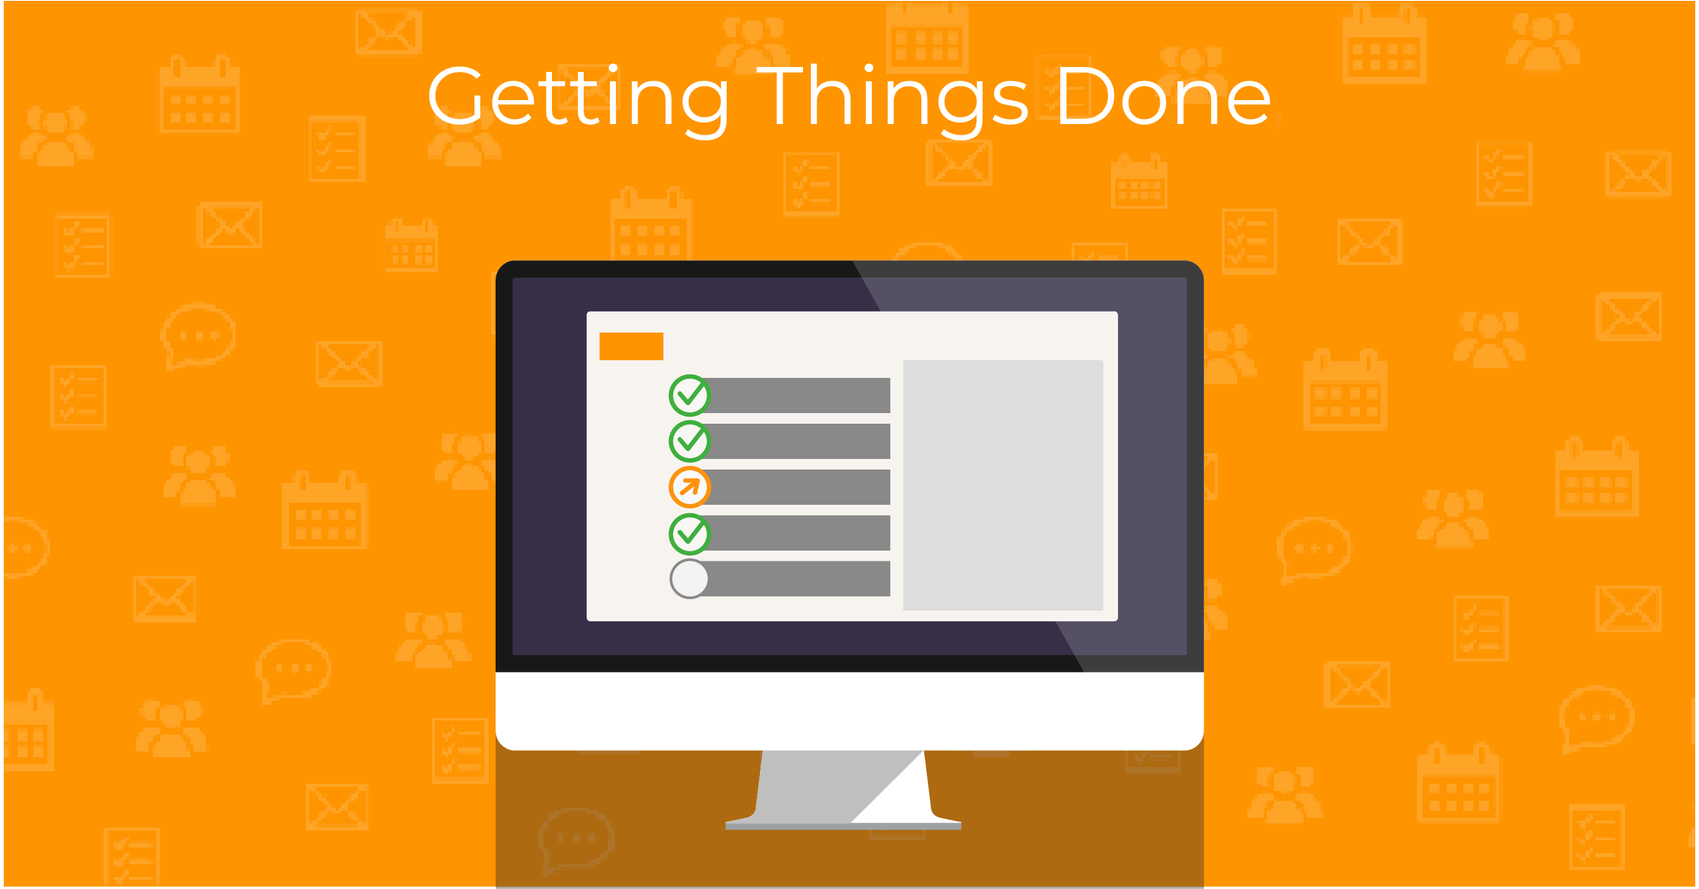 Getting things done with Tasks